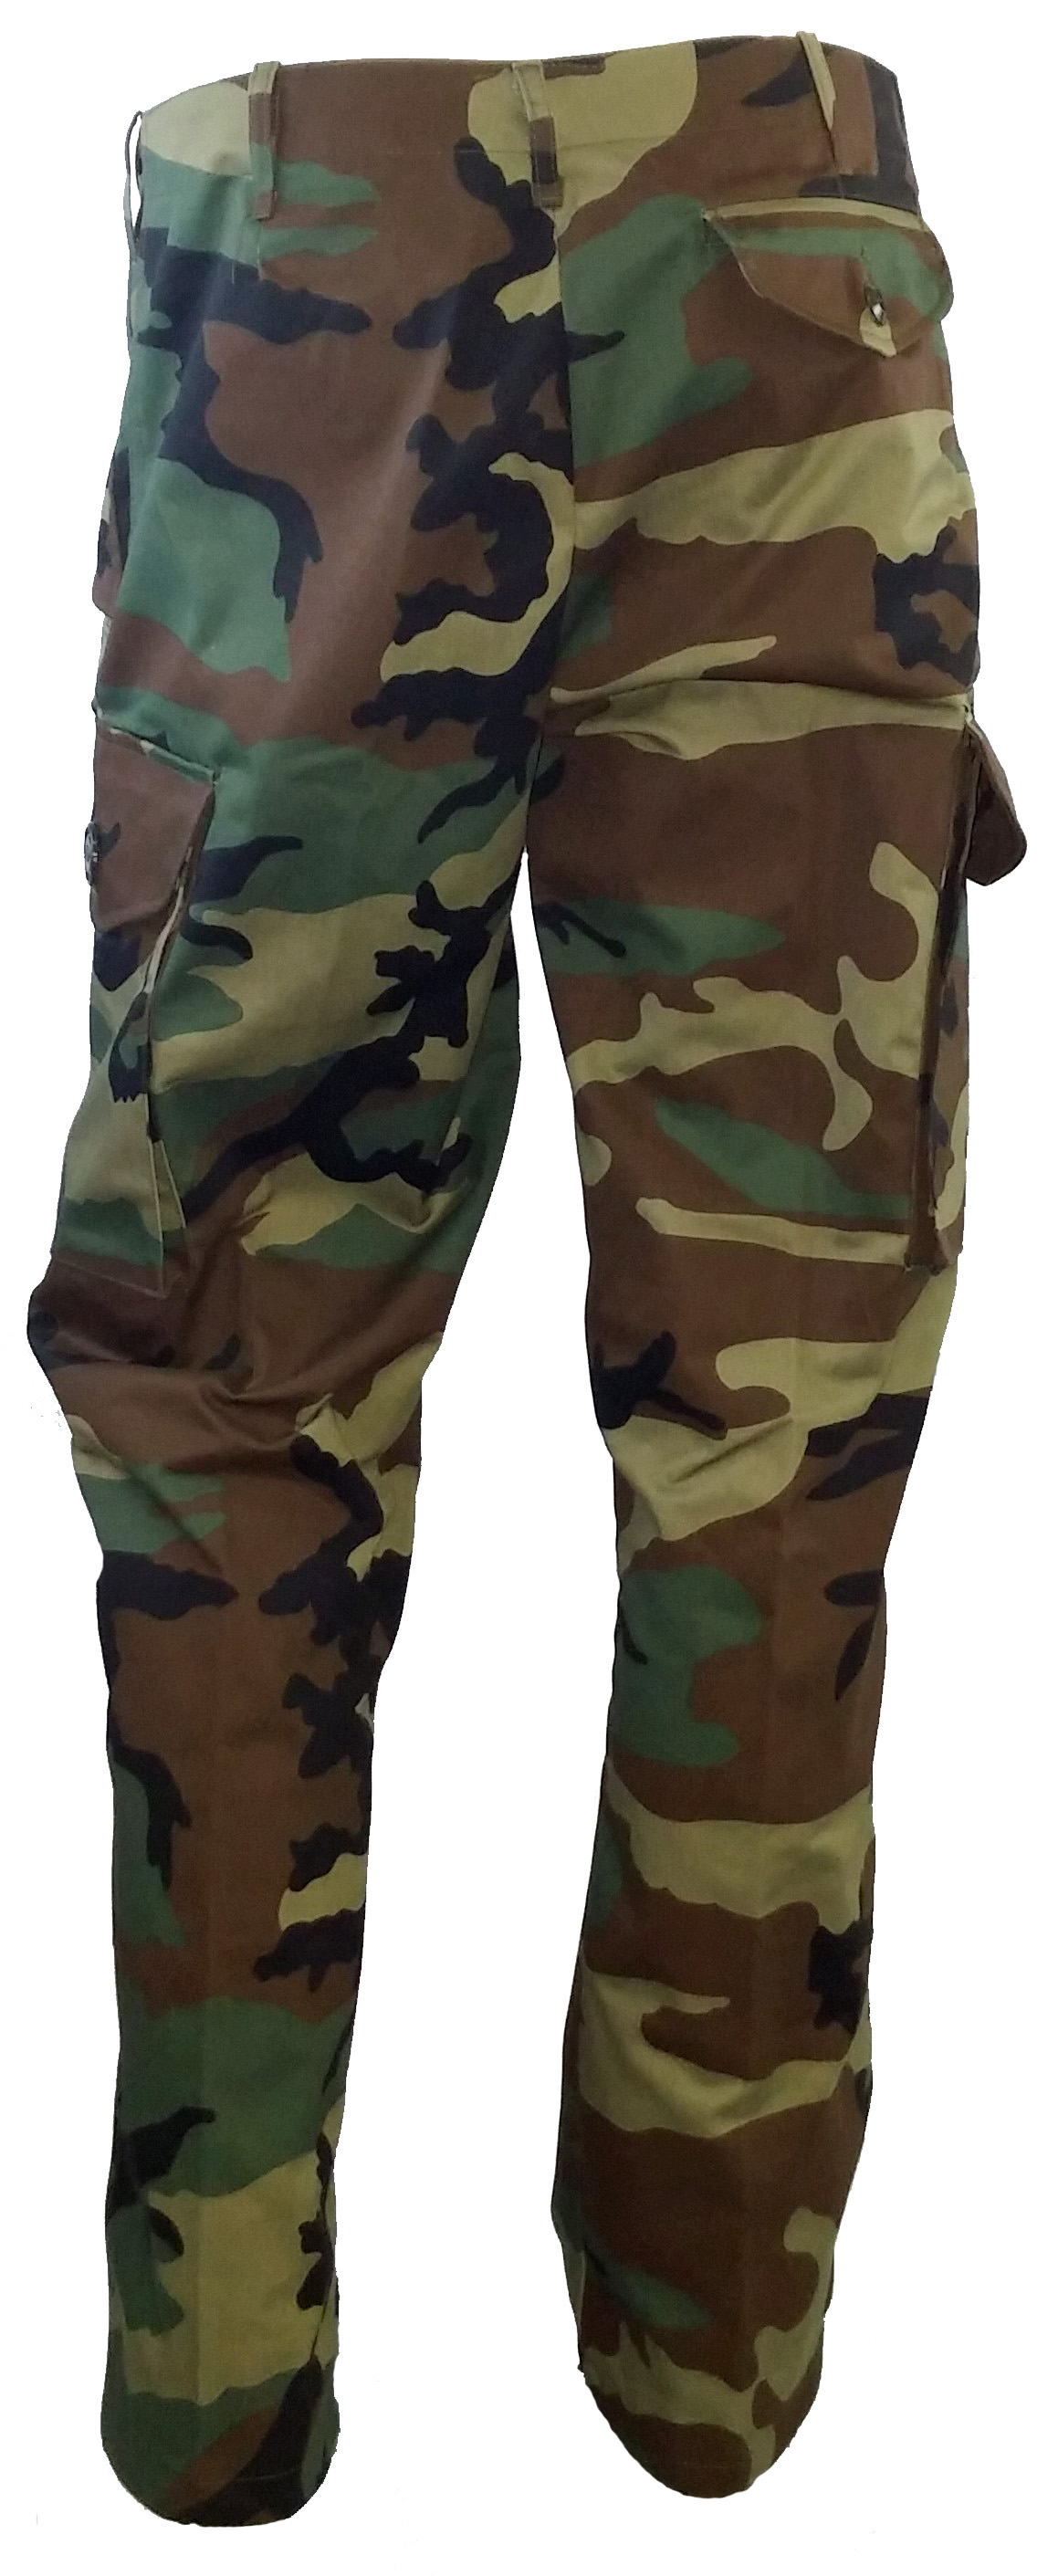 SGS Canadian style combat pants (All colors) | Military Surplus ...